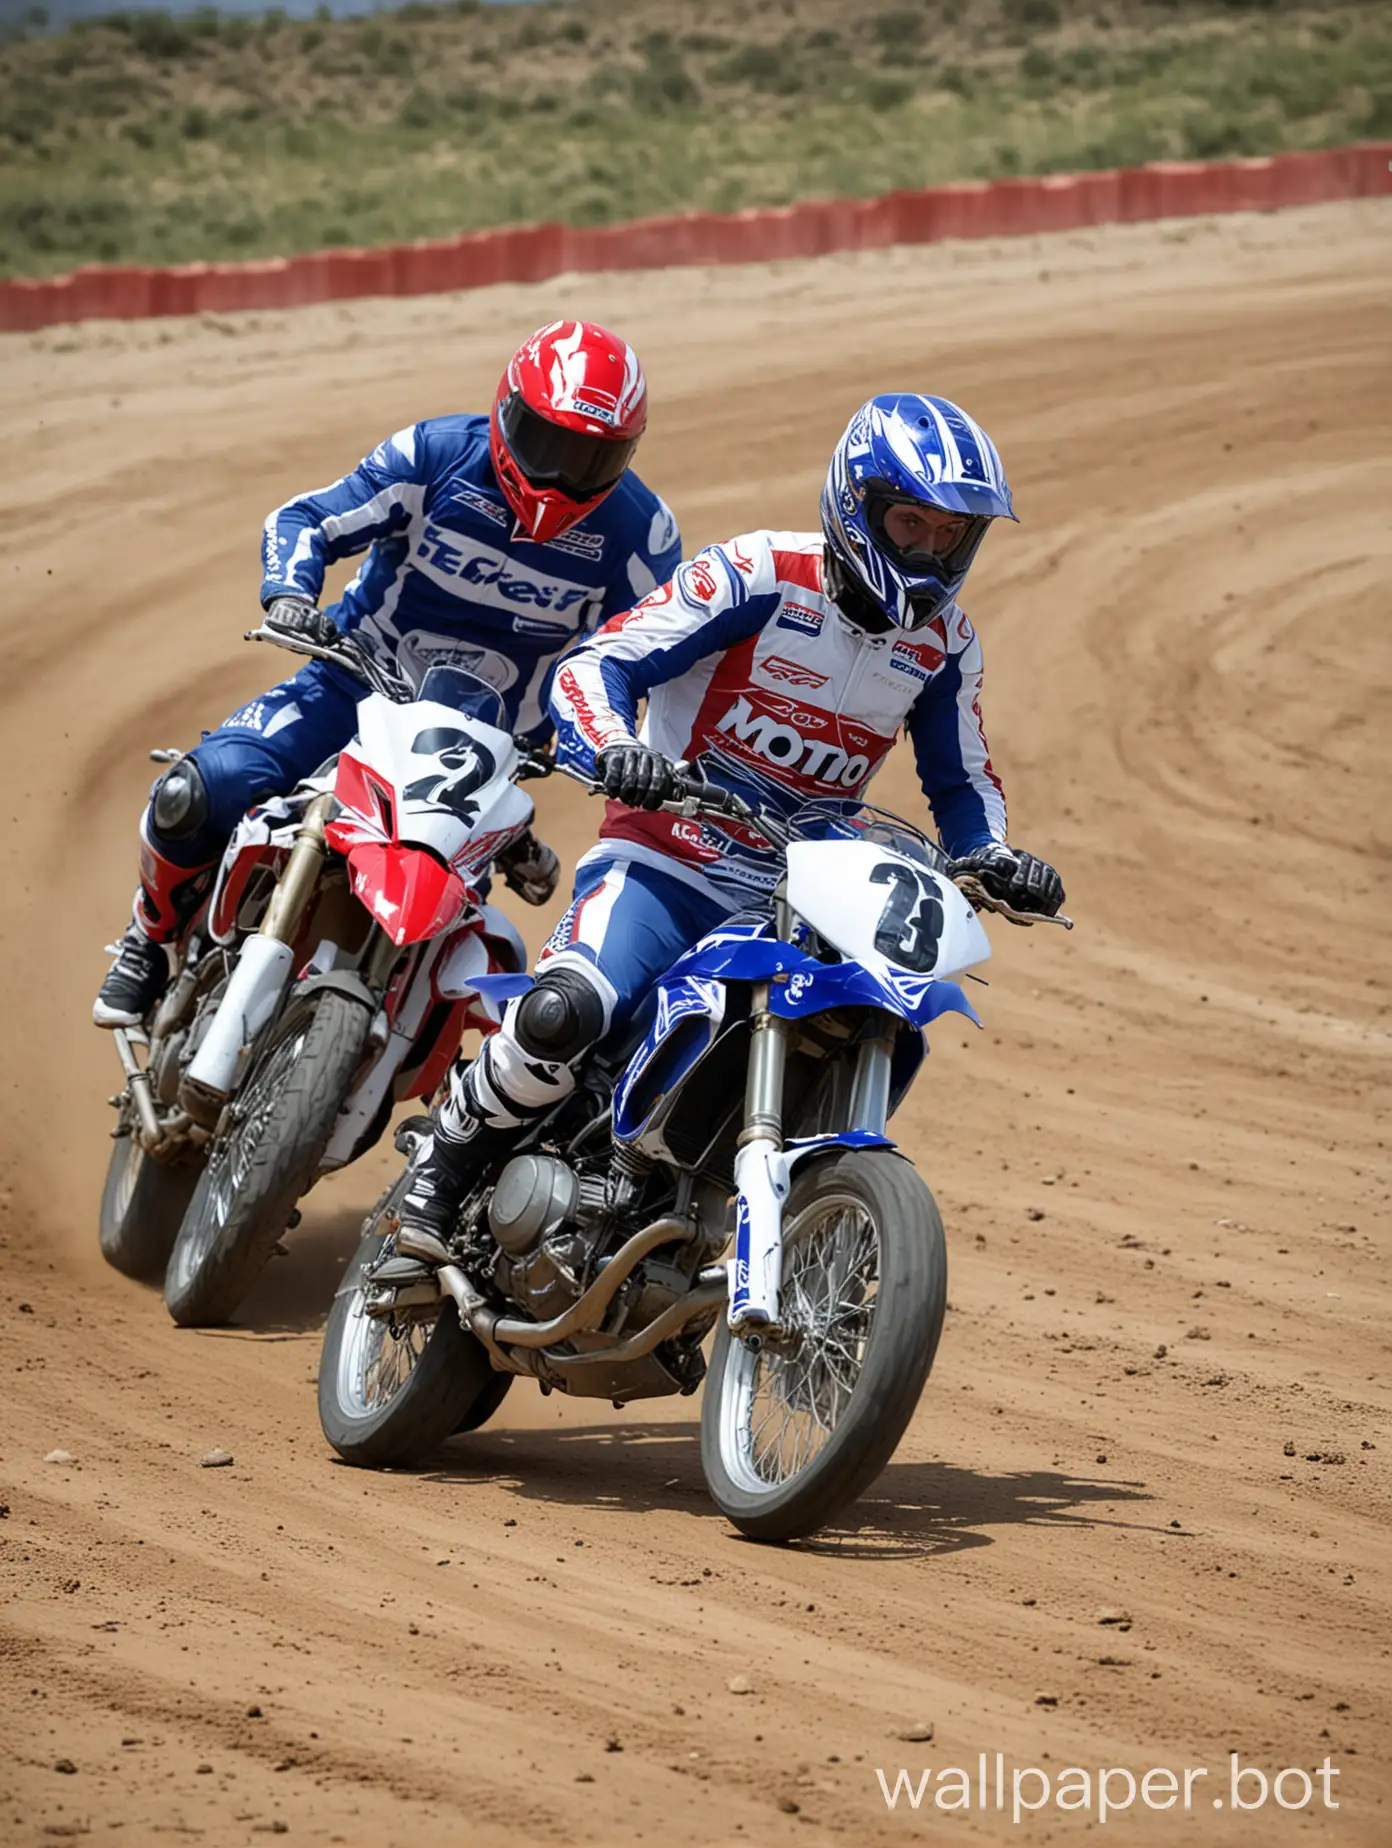 moto race, 2 bikers, Blue and white, red and white